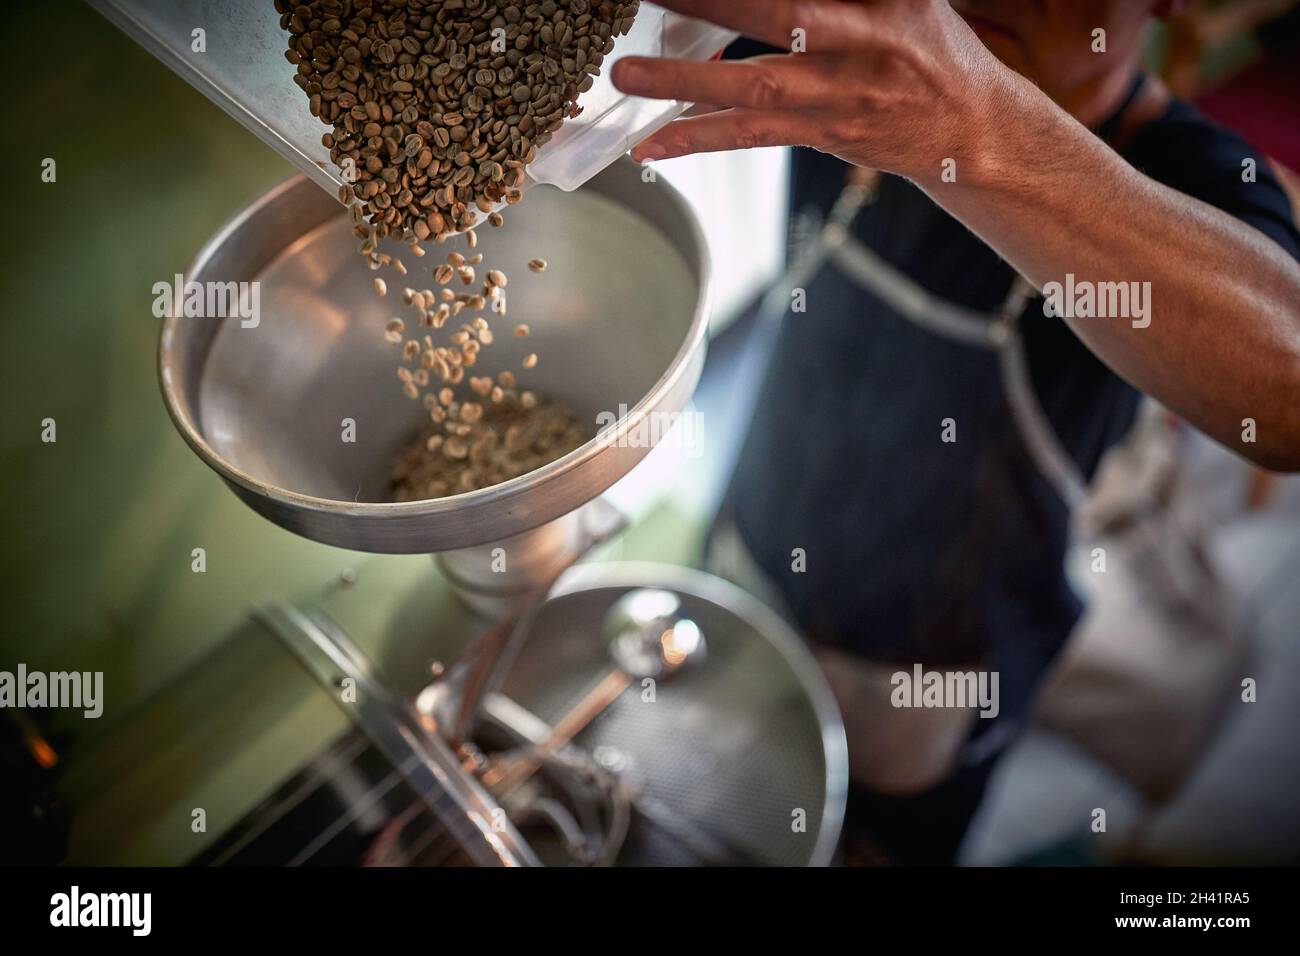 A man is making fragrant and aromatic ground coffee by pouring beans into the grinder. Coffee, beverage, producing Stock Photo